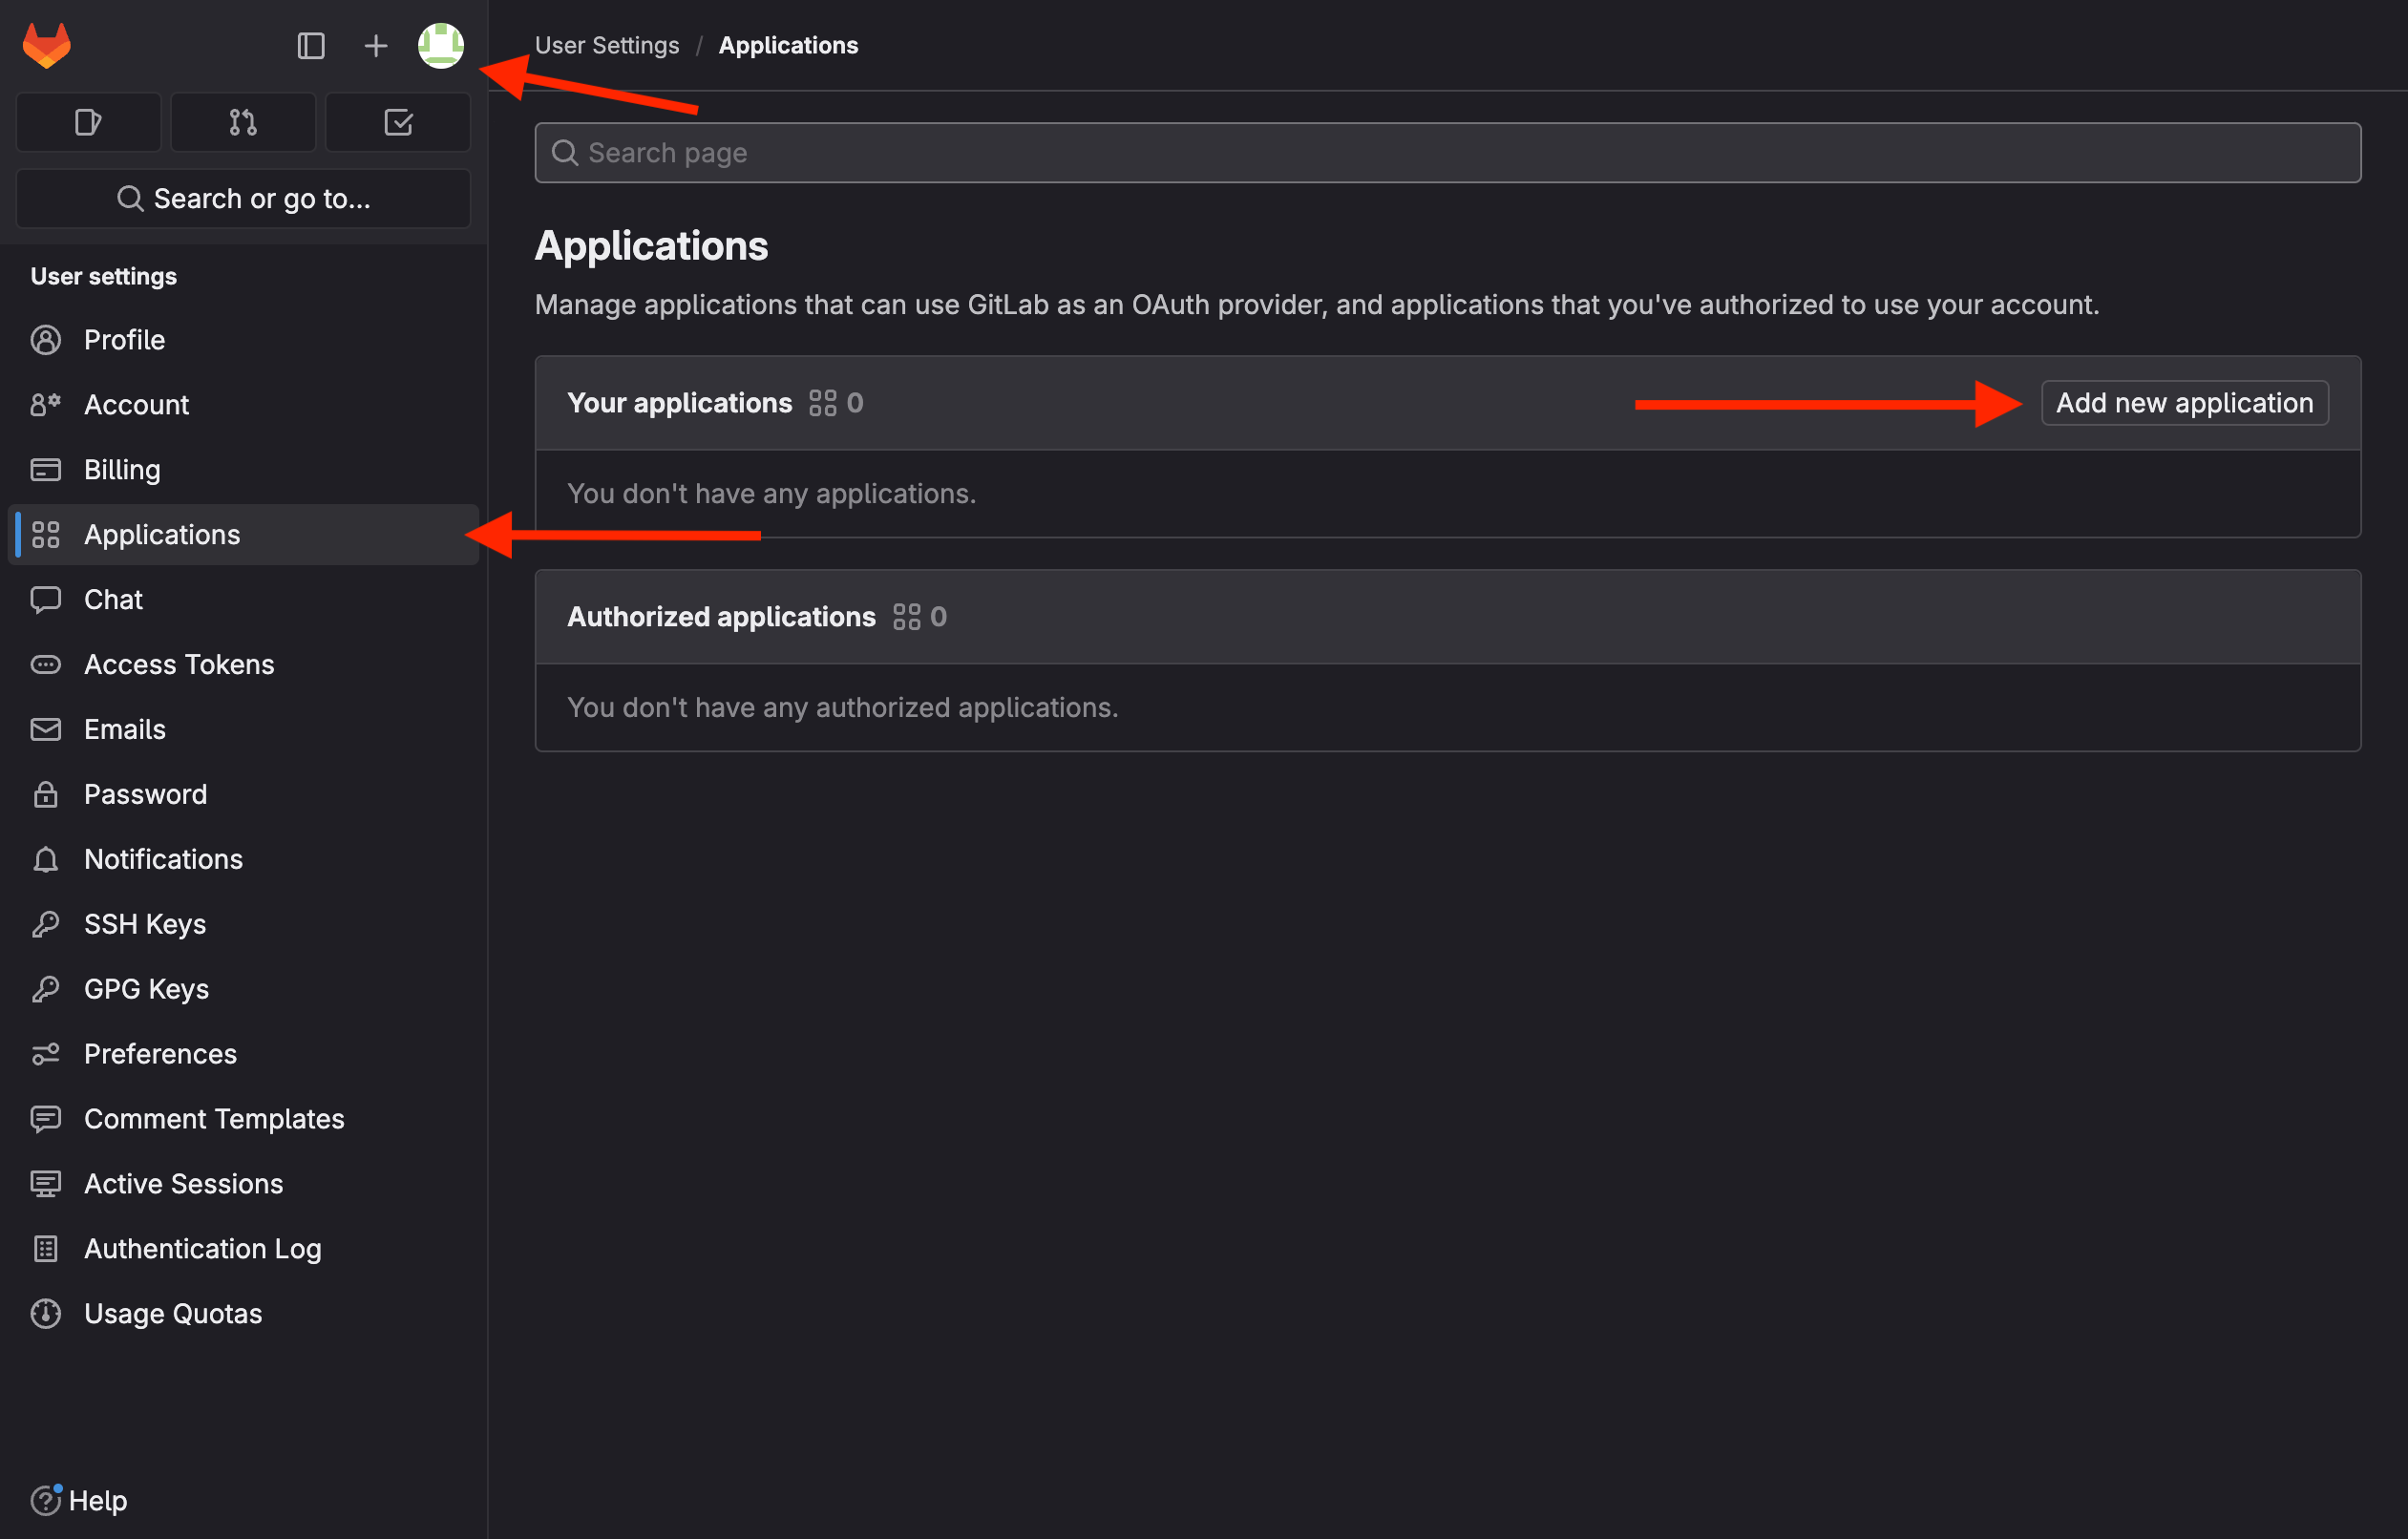 Screenshot of the gitlab applications page with an arrow pointing to the Add new application button